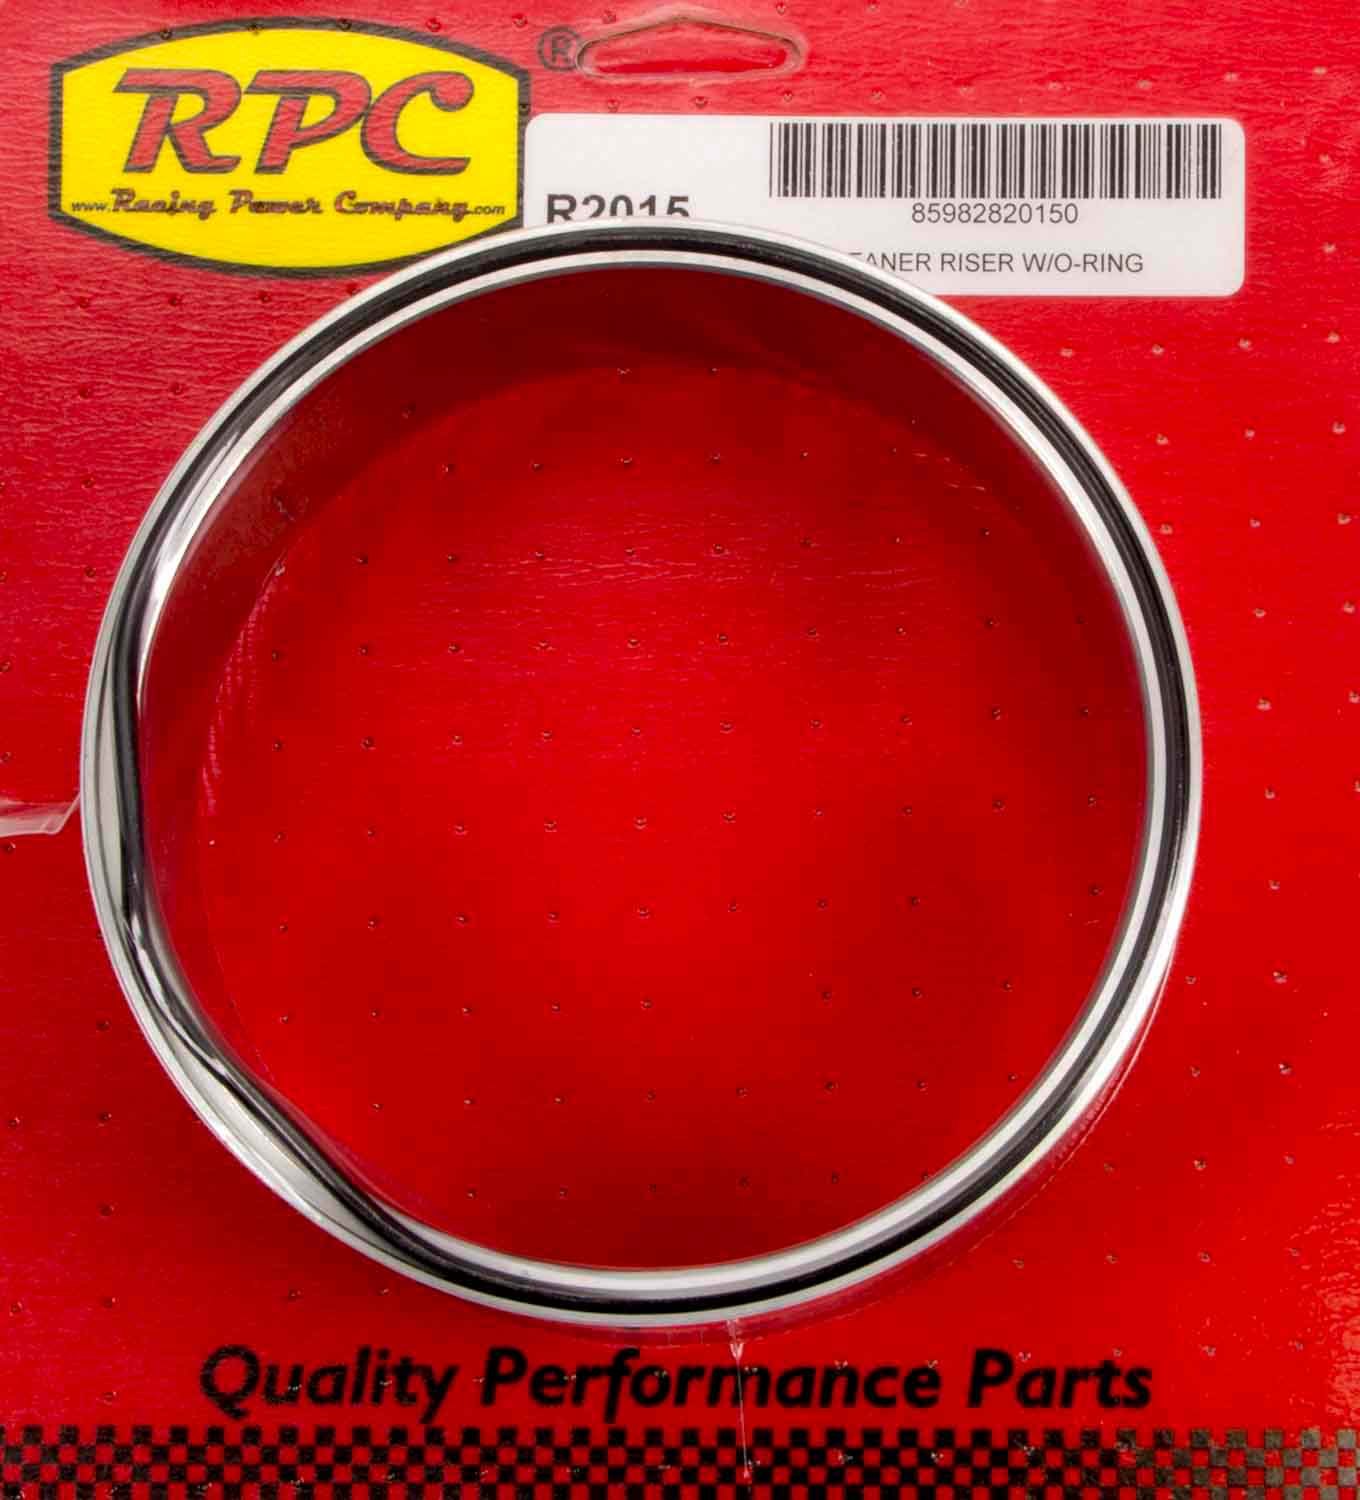 Racing Power Company R2015 Air Cleaner Spacer, Sure Seal, 2-1/4 in Thick, 5-1/8 in Carb Flange, Aluminum, Natural, Each